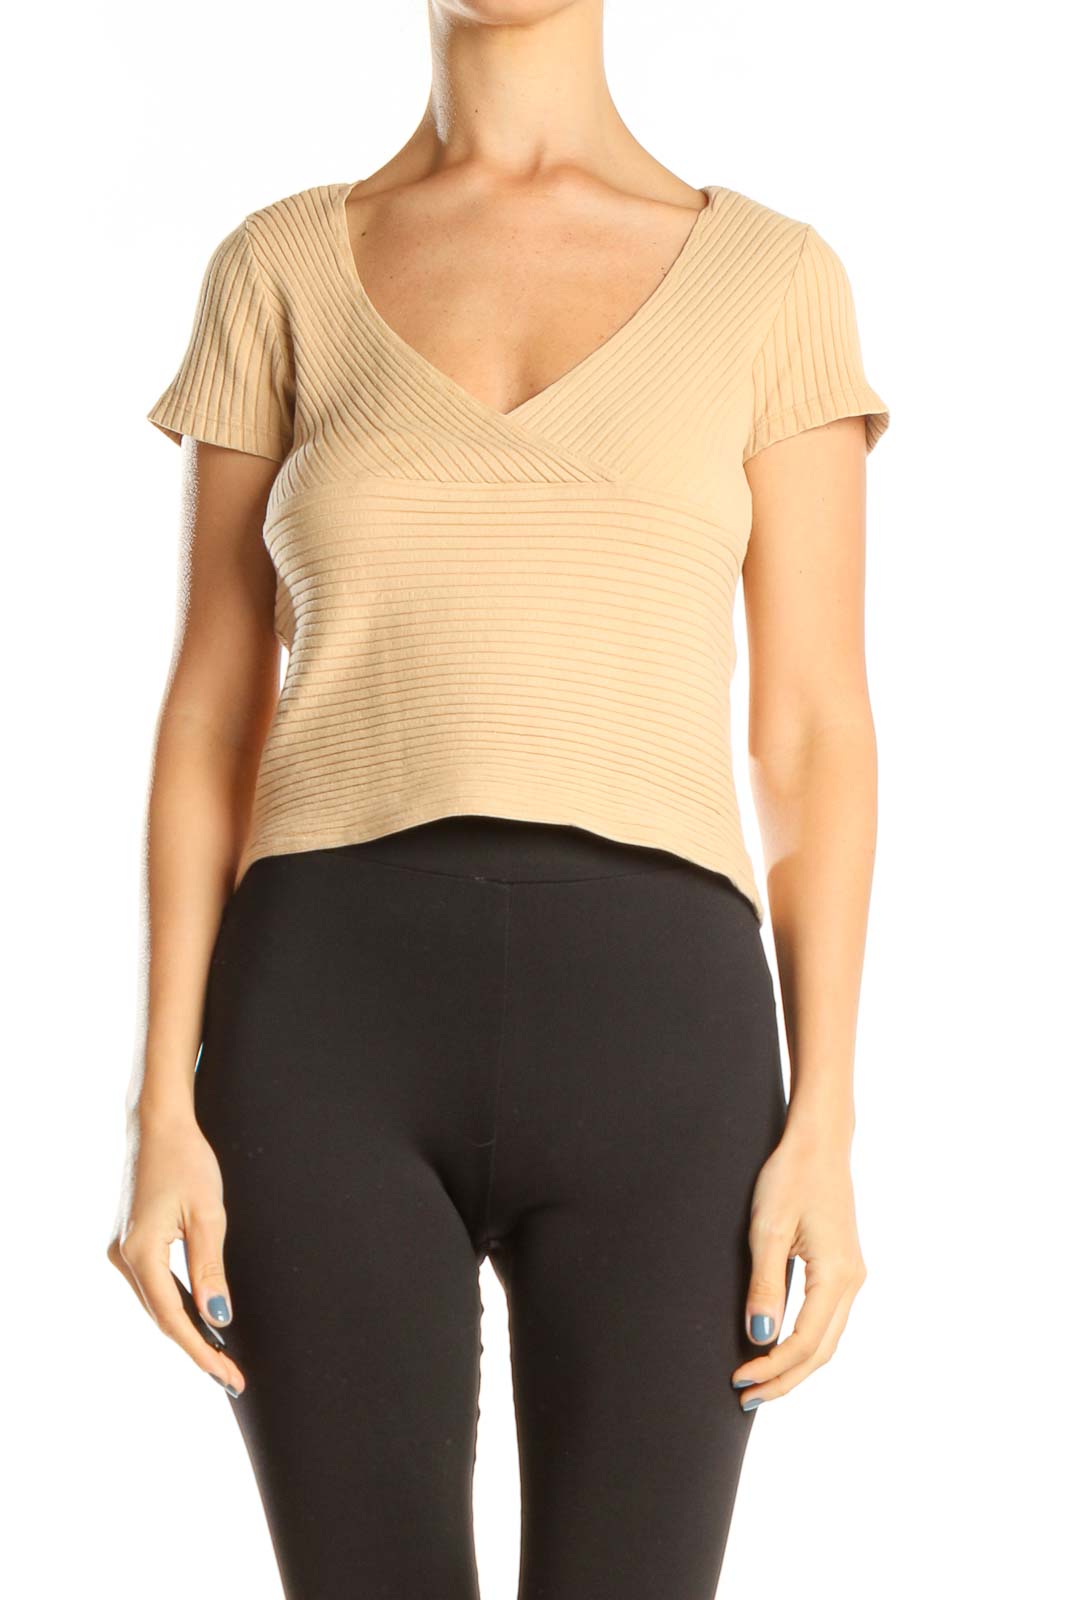 Tan All Day Wear Crop Top Front